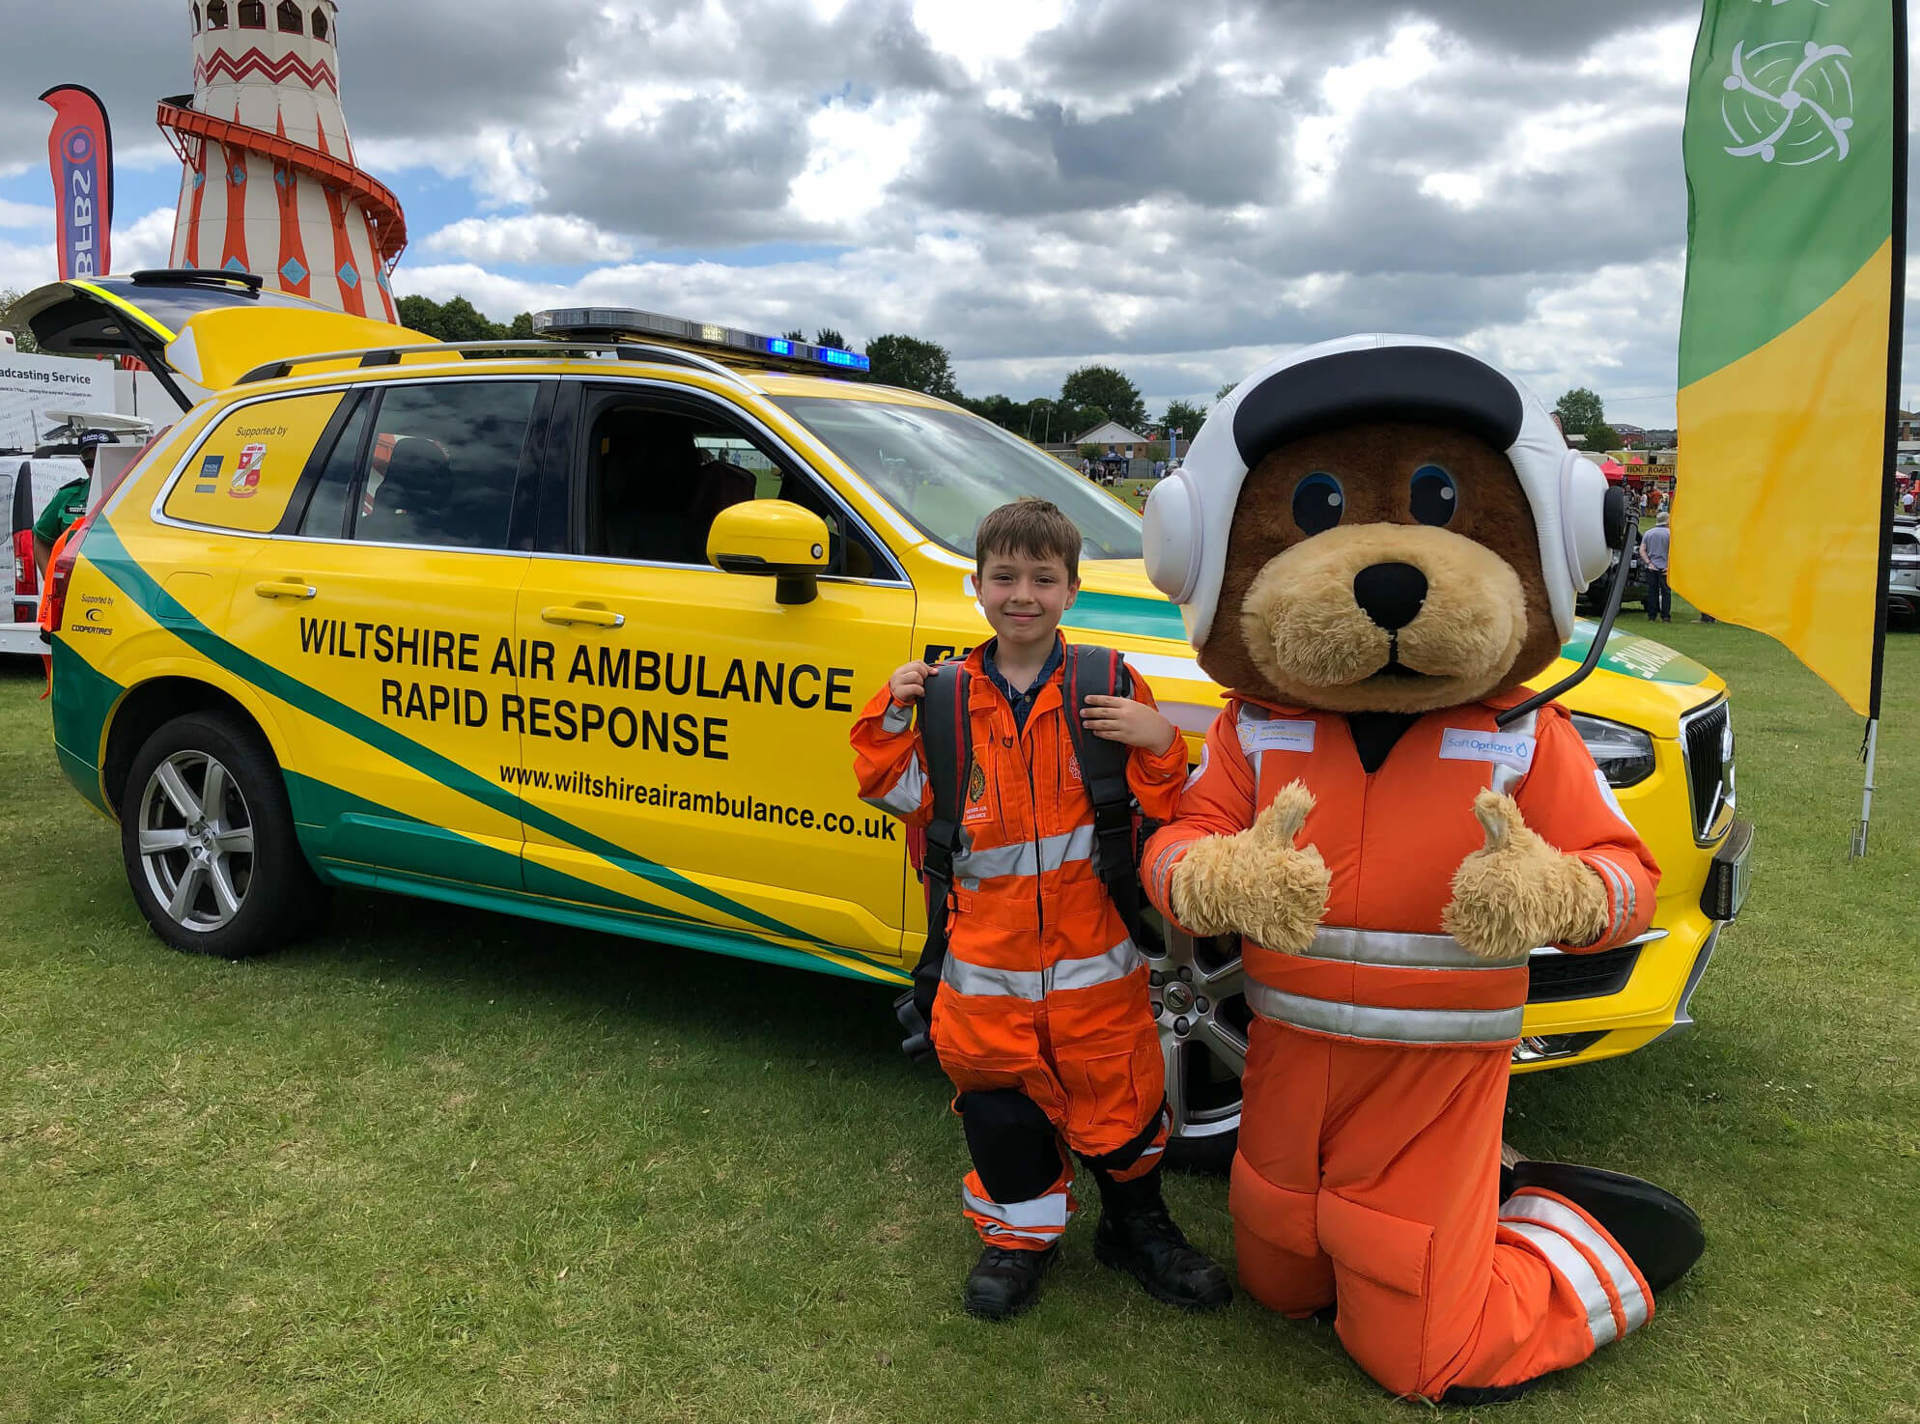 Mascot Wilber wearing an orange flight suit next to a child wearing a small orange flight suit in front of the critical care car.